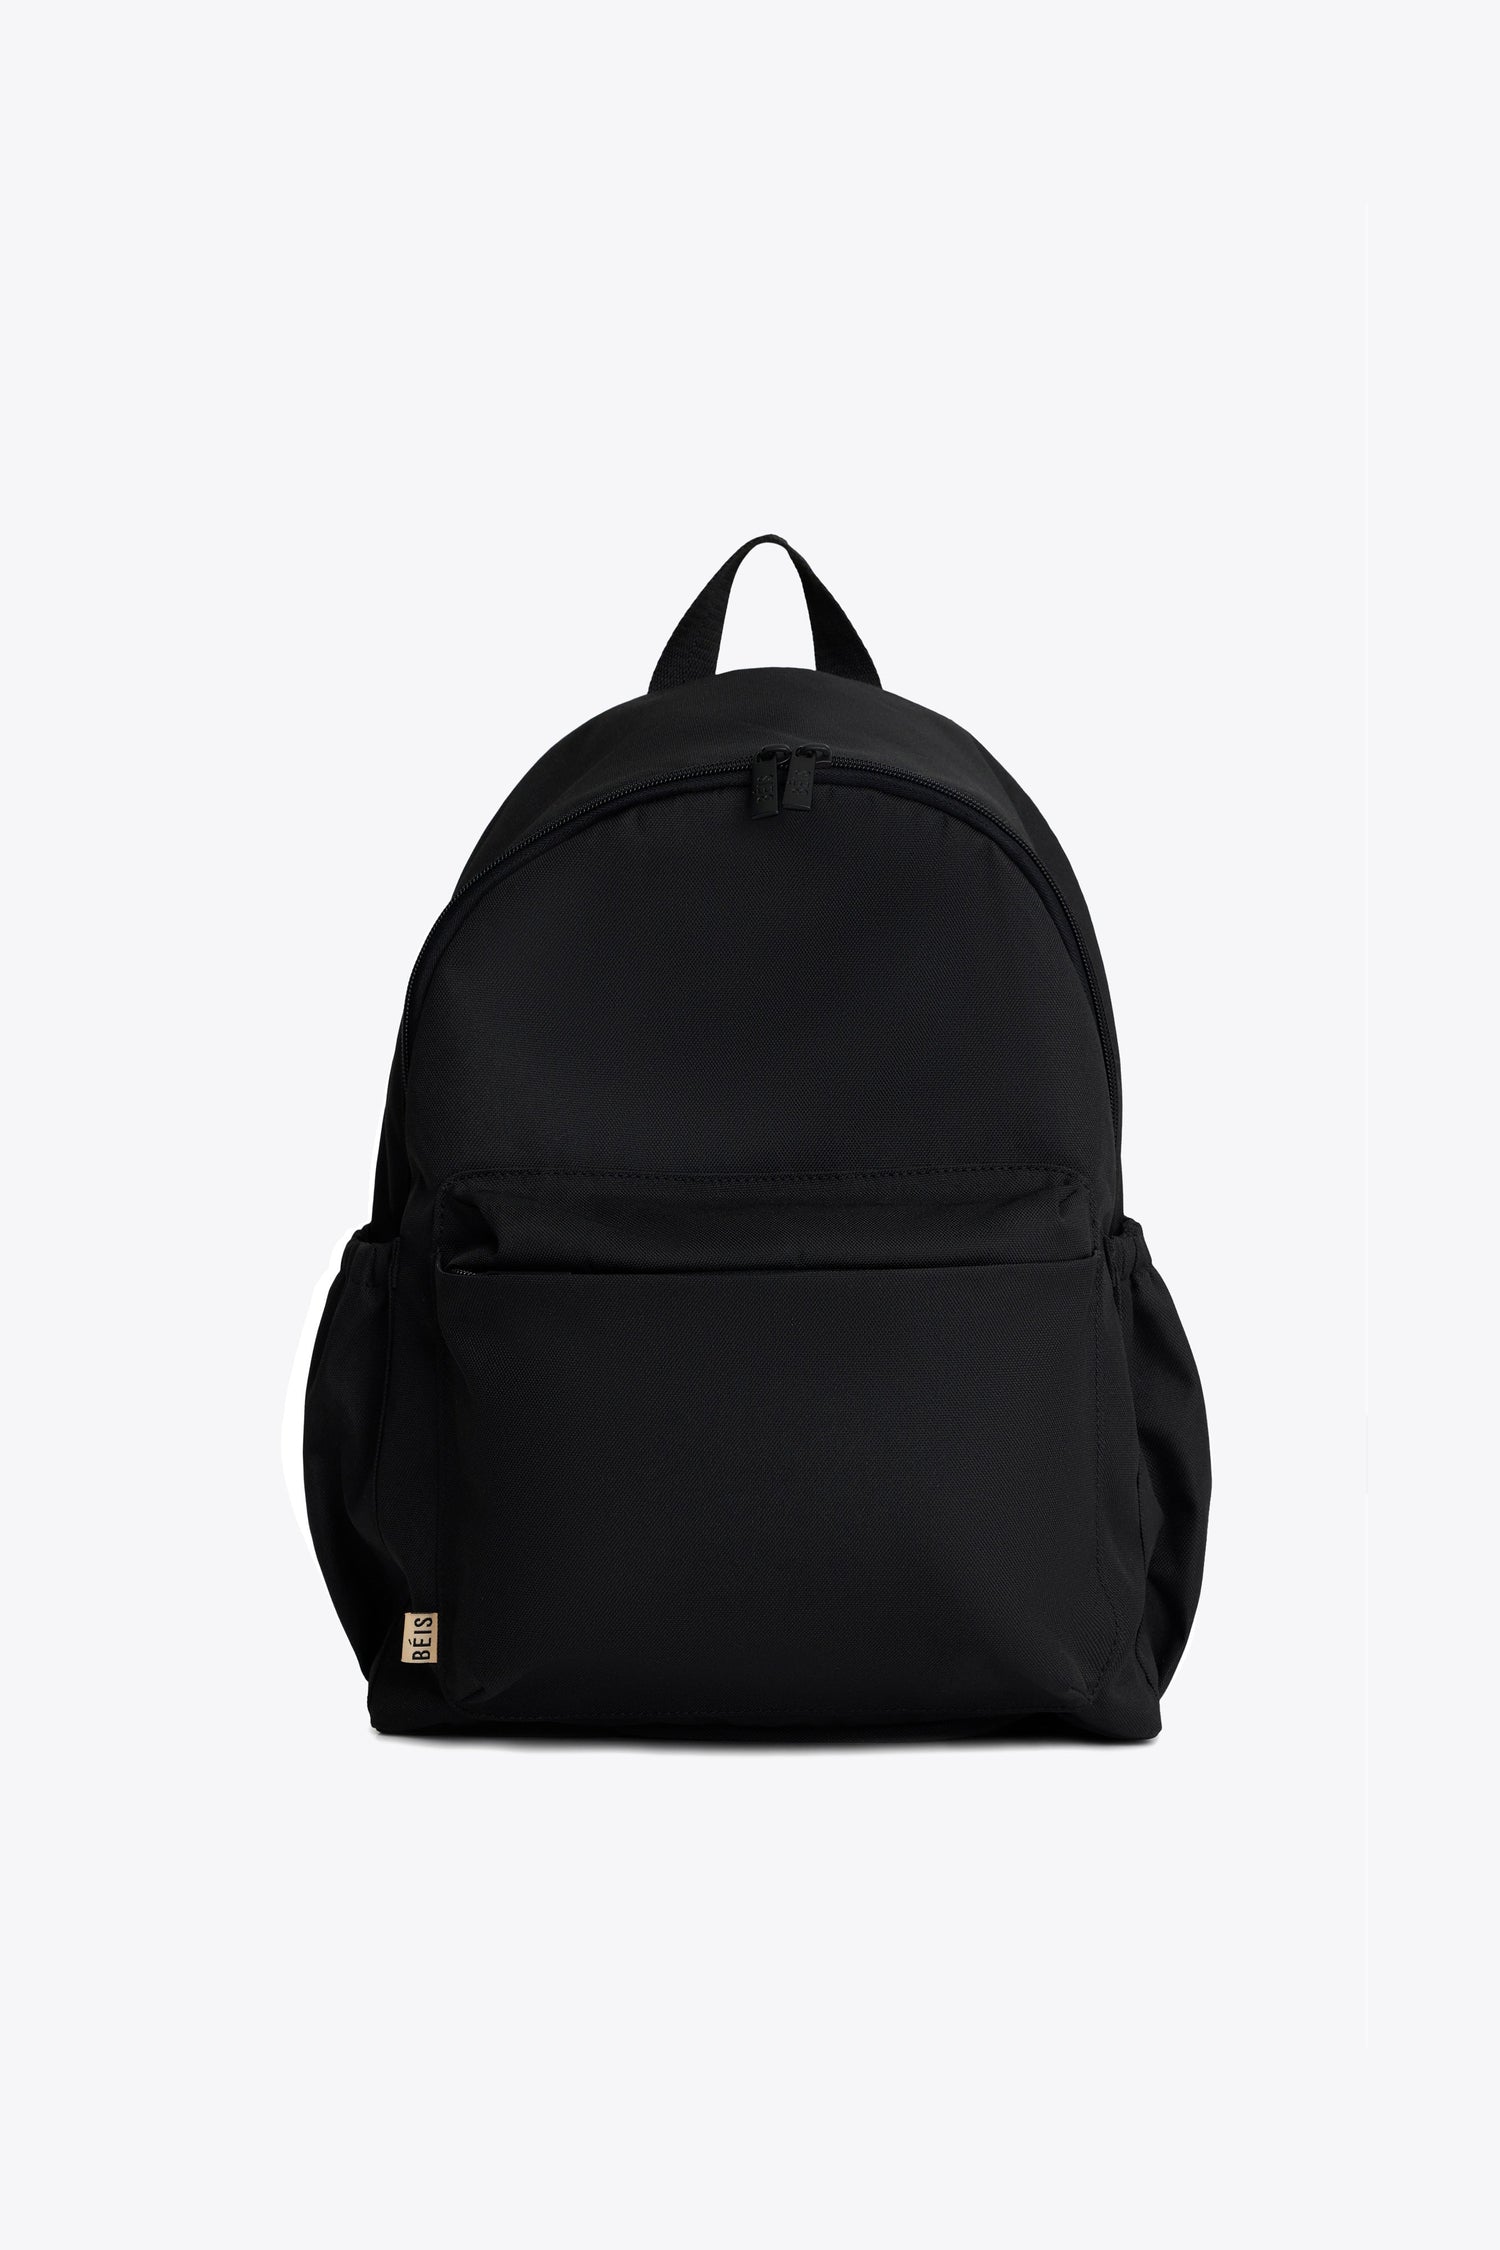 The BÉISics Backpack Colors